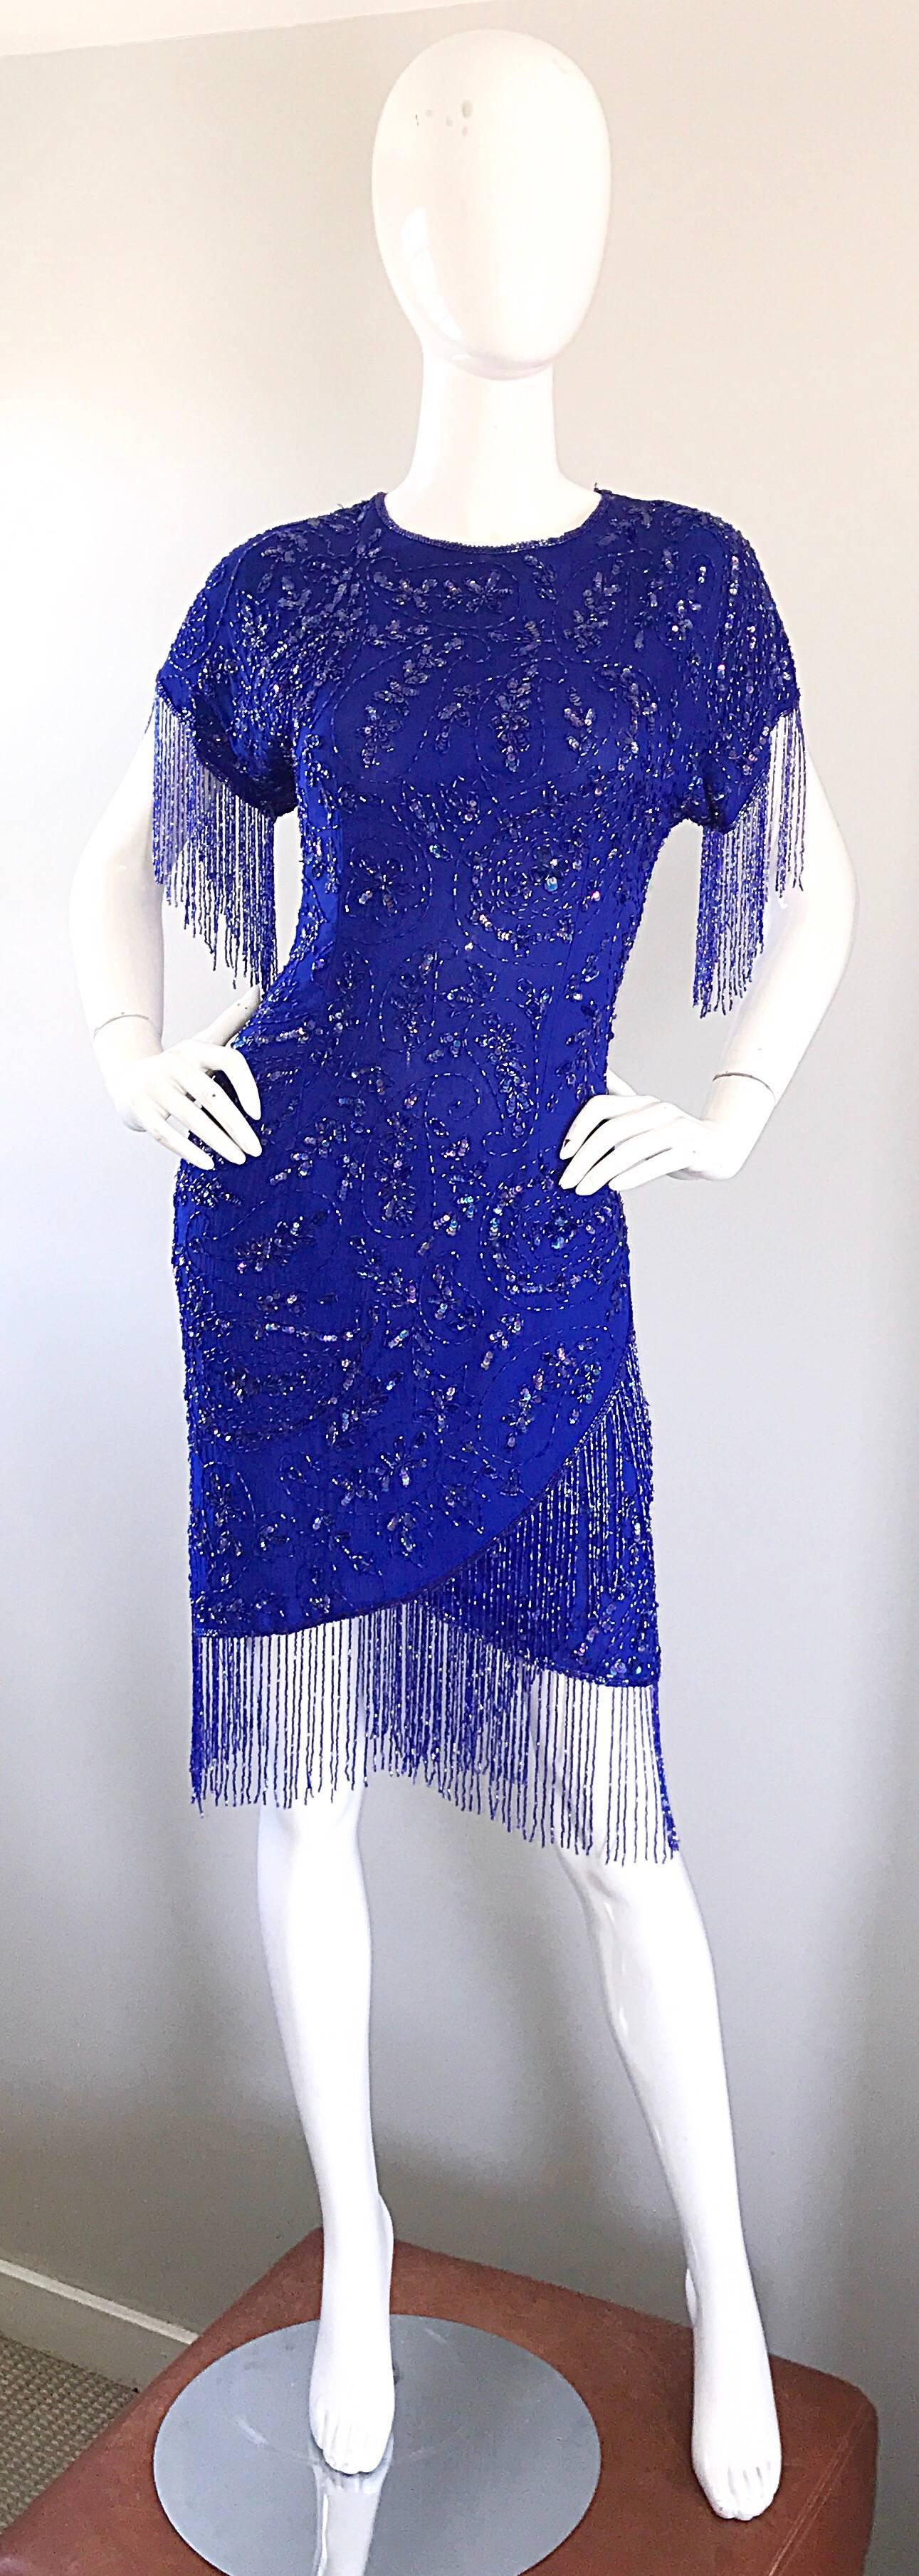 Incredible 90s royal blue silk fully beaded and sequined fringed flapper style short sleeve dress! Features thousands of hand sewn sequins and beads throughout the entire dress. Beaded fringe trim at each sleeve and at the hem. 100% Silk. Hidden